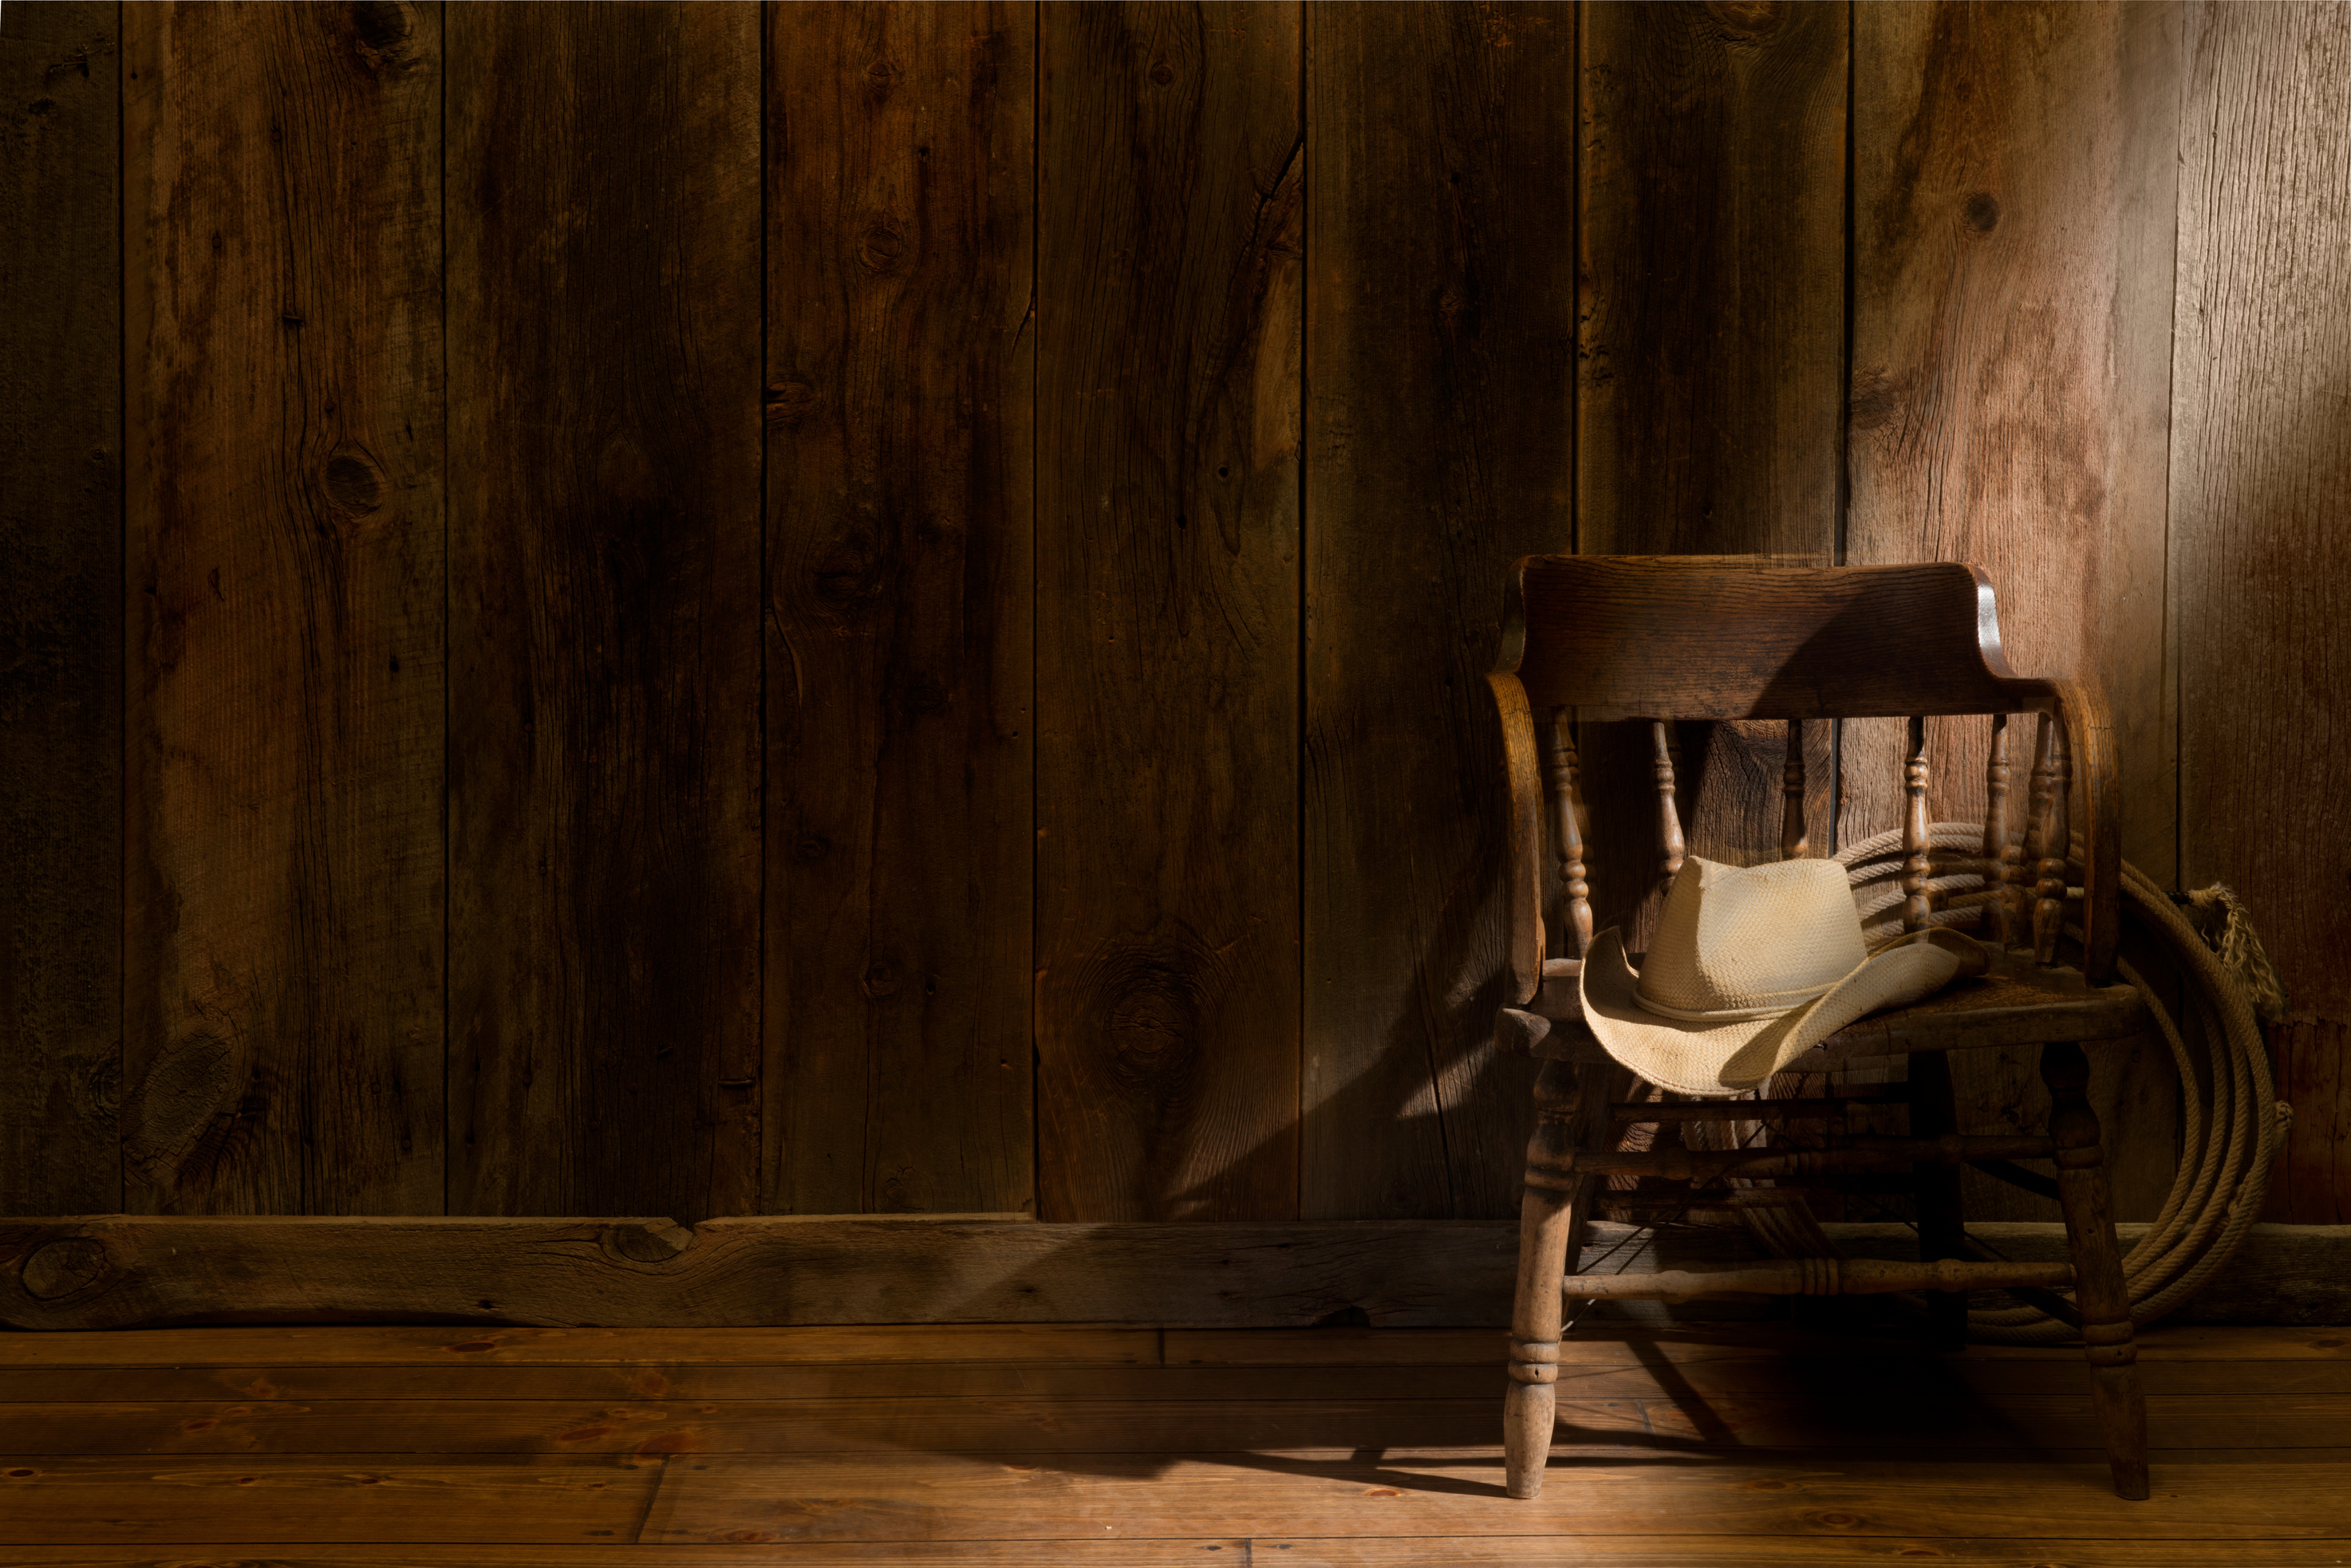 Western theme with rustic barnwood and saloon chair